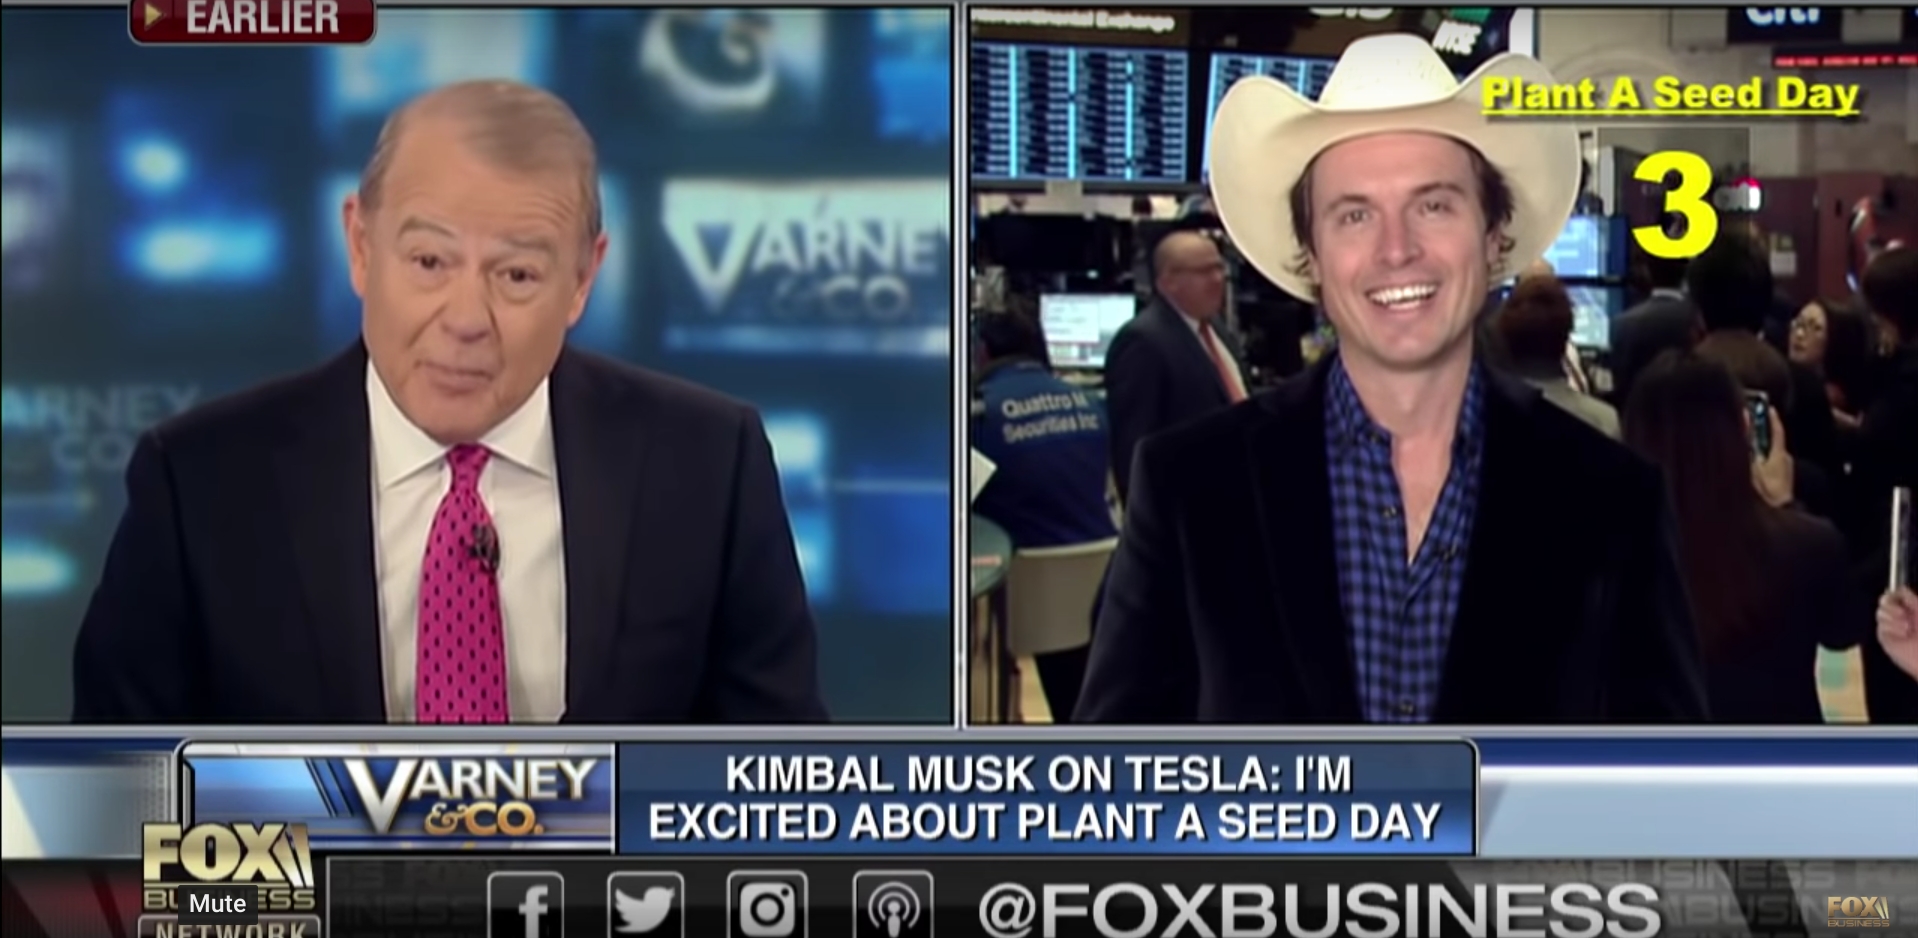 Kimbal Musk trolls Fox with ‘Plant a Seed Day’ in exchange about Tesla’s new chair